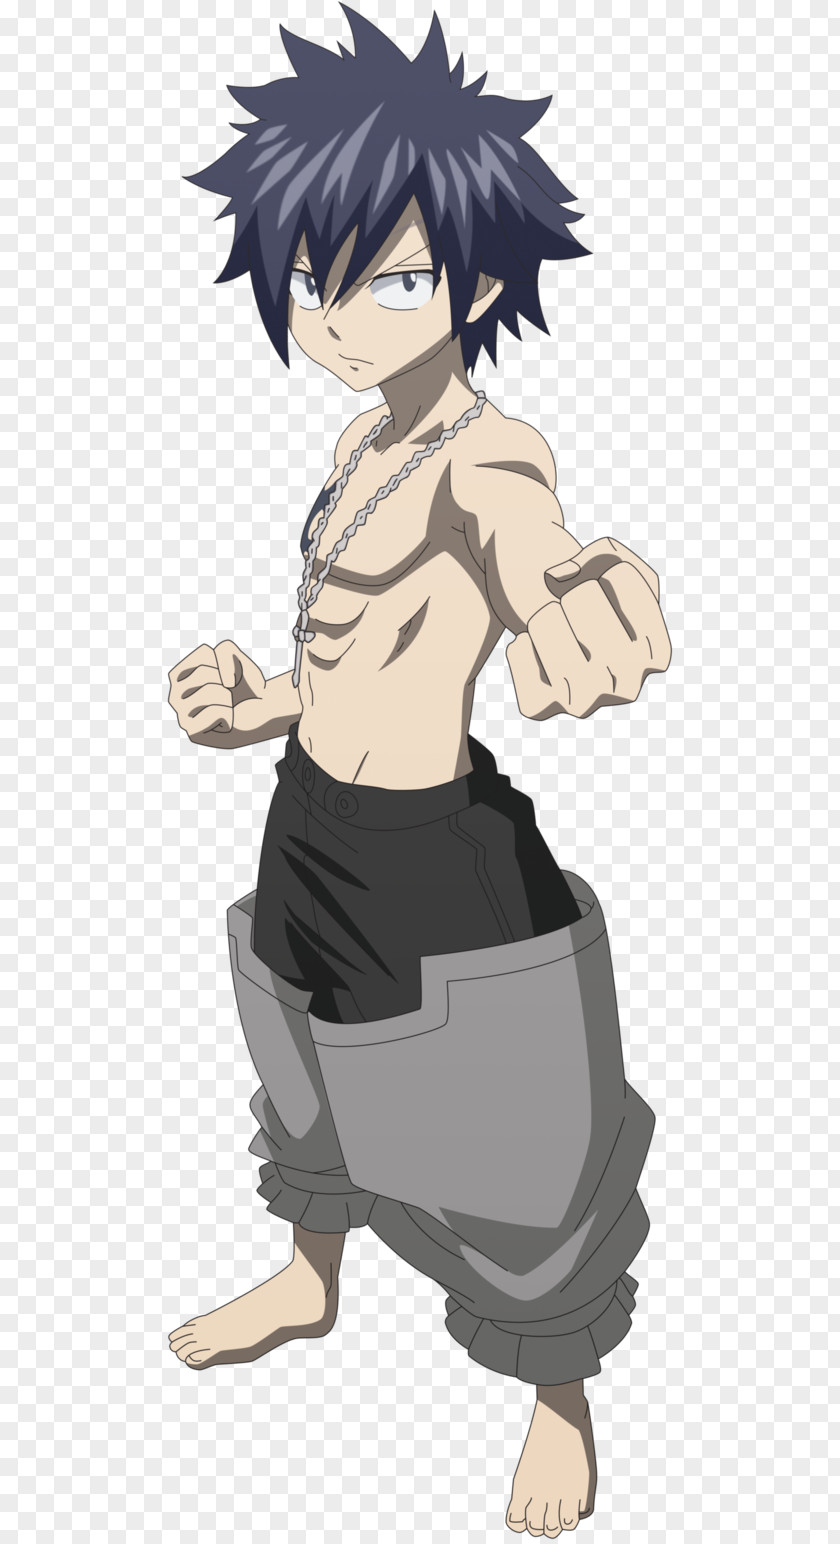 Gray Fullbuster Natsu Dragneel Fairy Tail Tale PNG